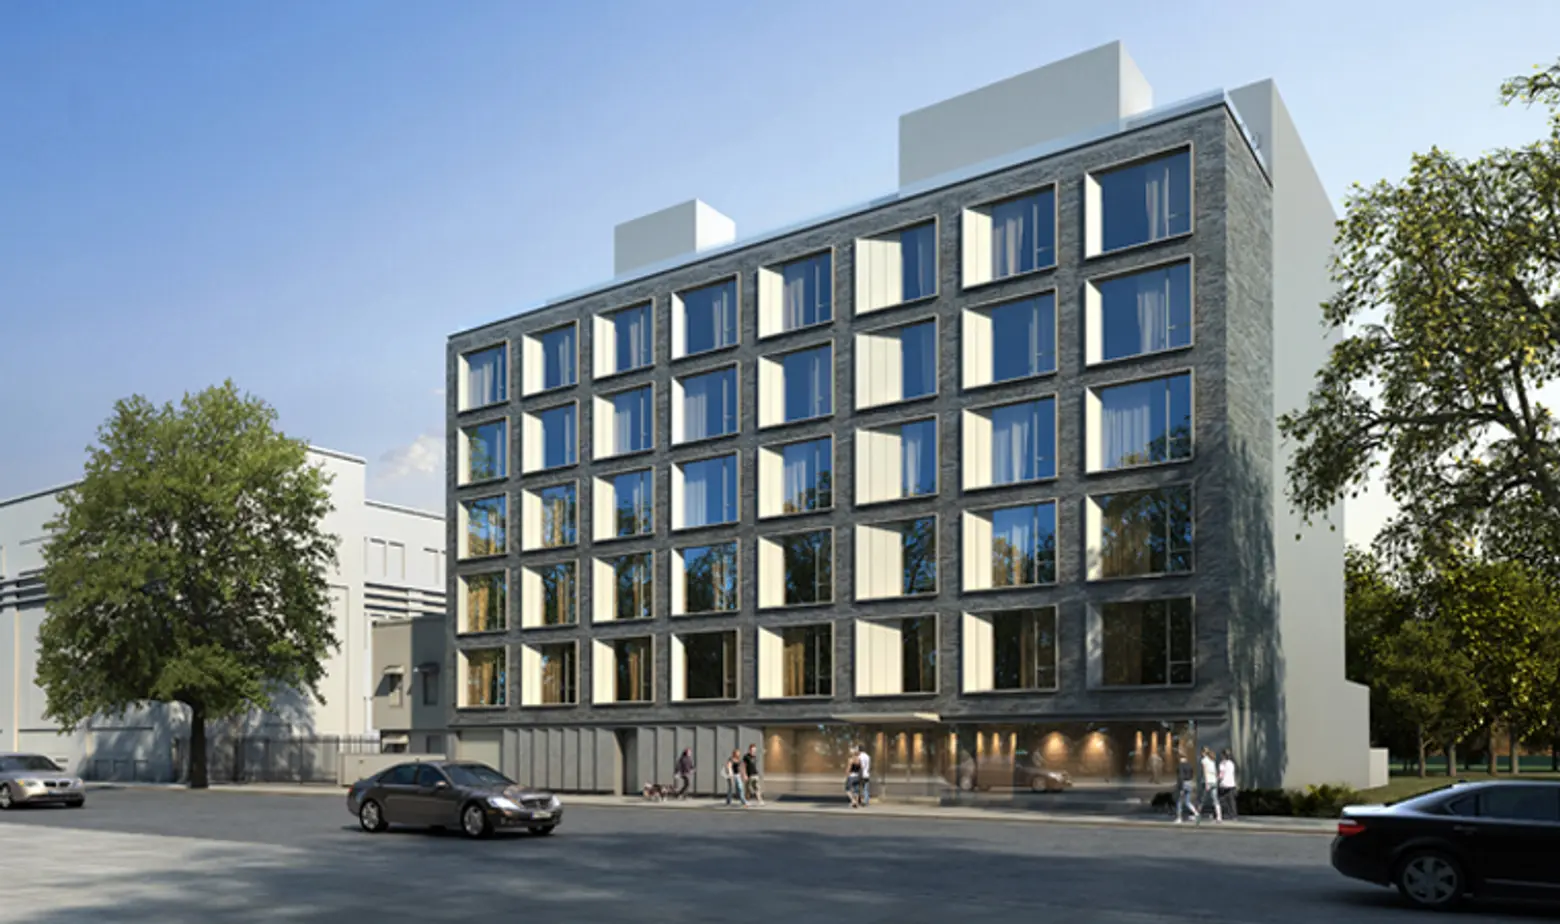 New Residential Building To Rise Near the Museum of the Moving Image in Astoria